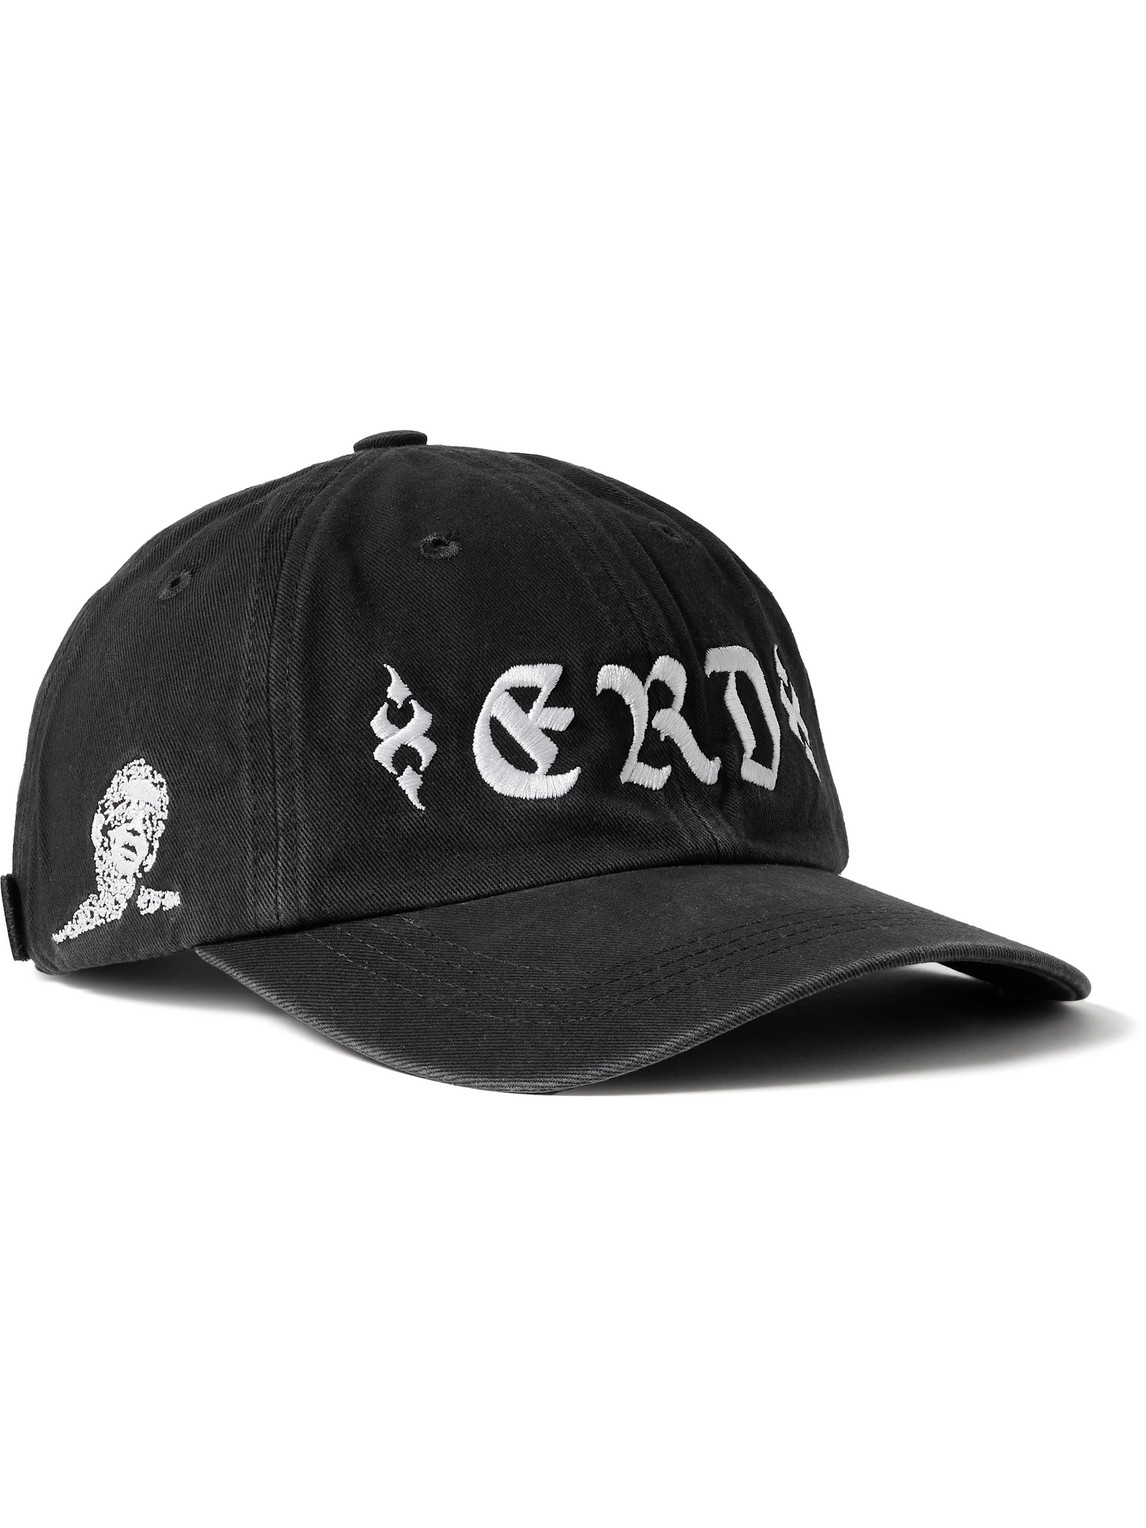 Die In Bed Logo-Embroidered Distressed Cotton-Twill Baseball Cap